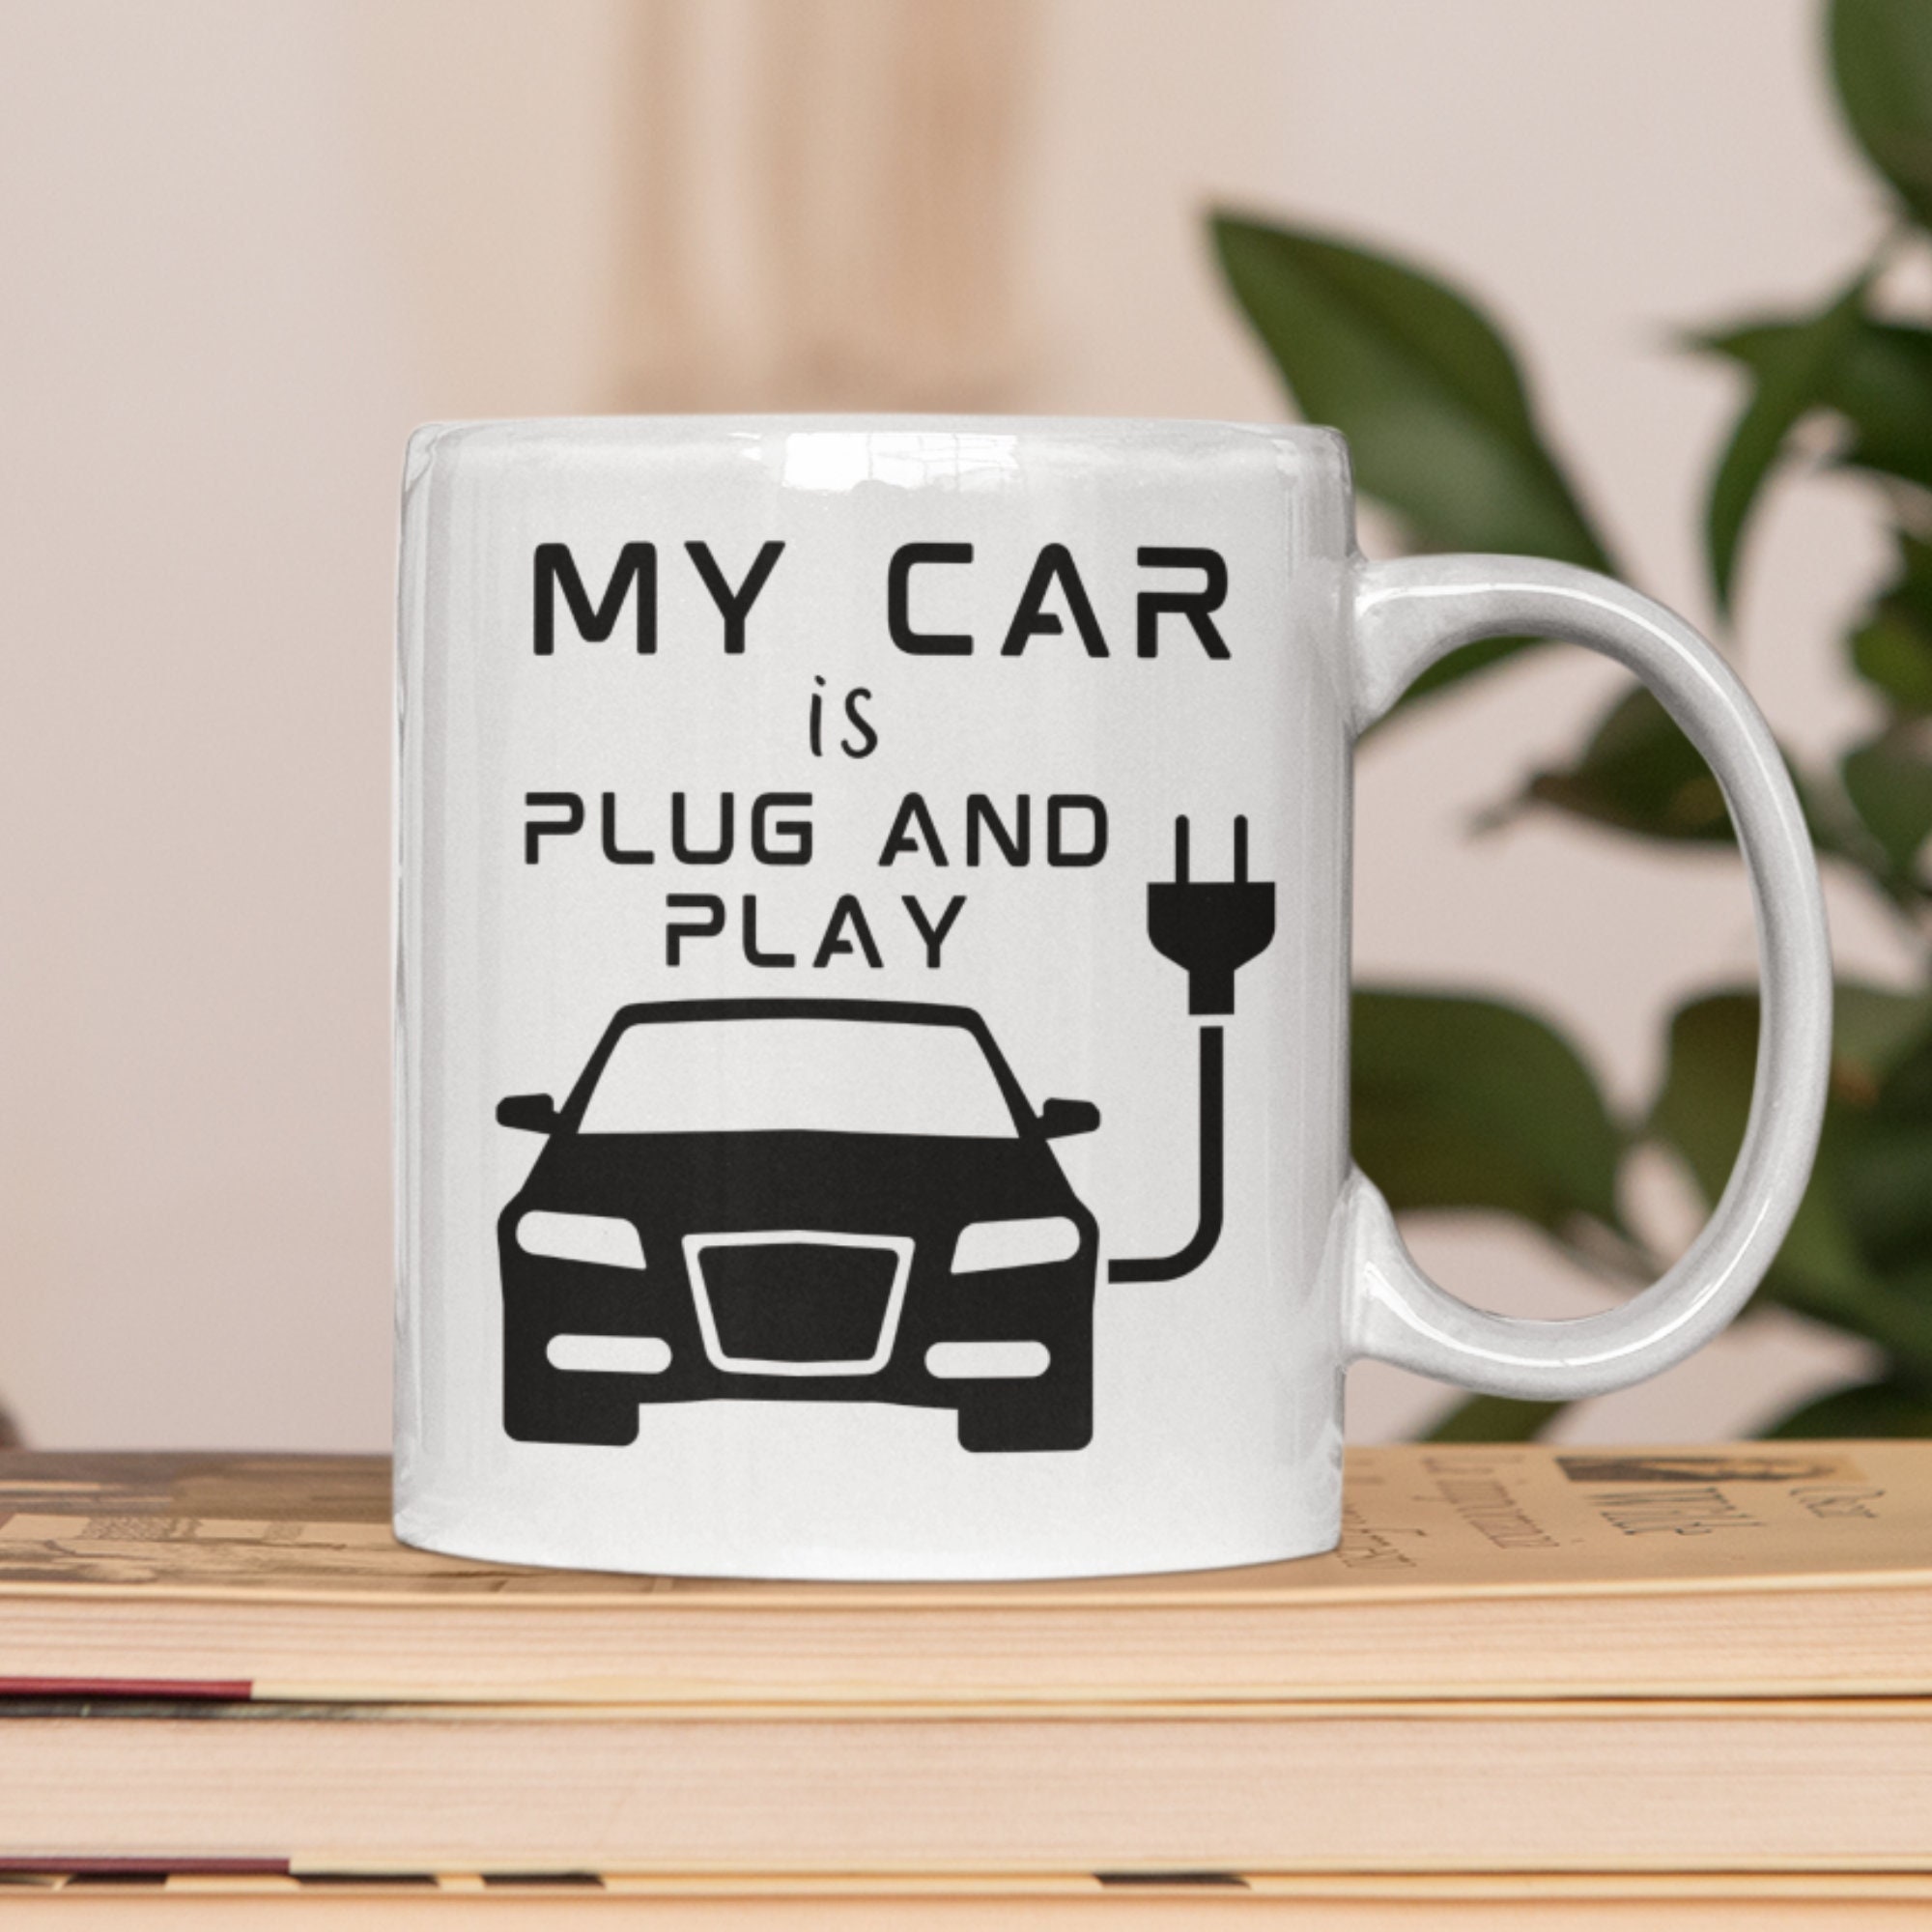 EV gift guide: fun gifts for EV enthusiasts